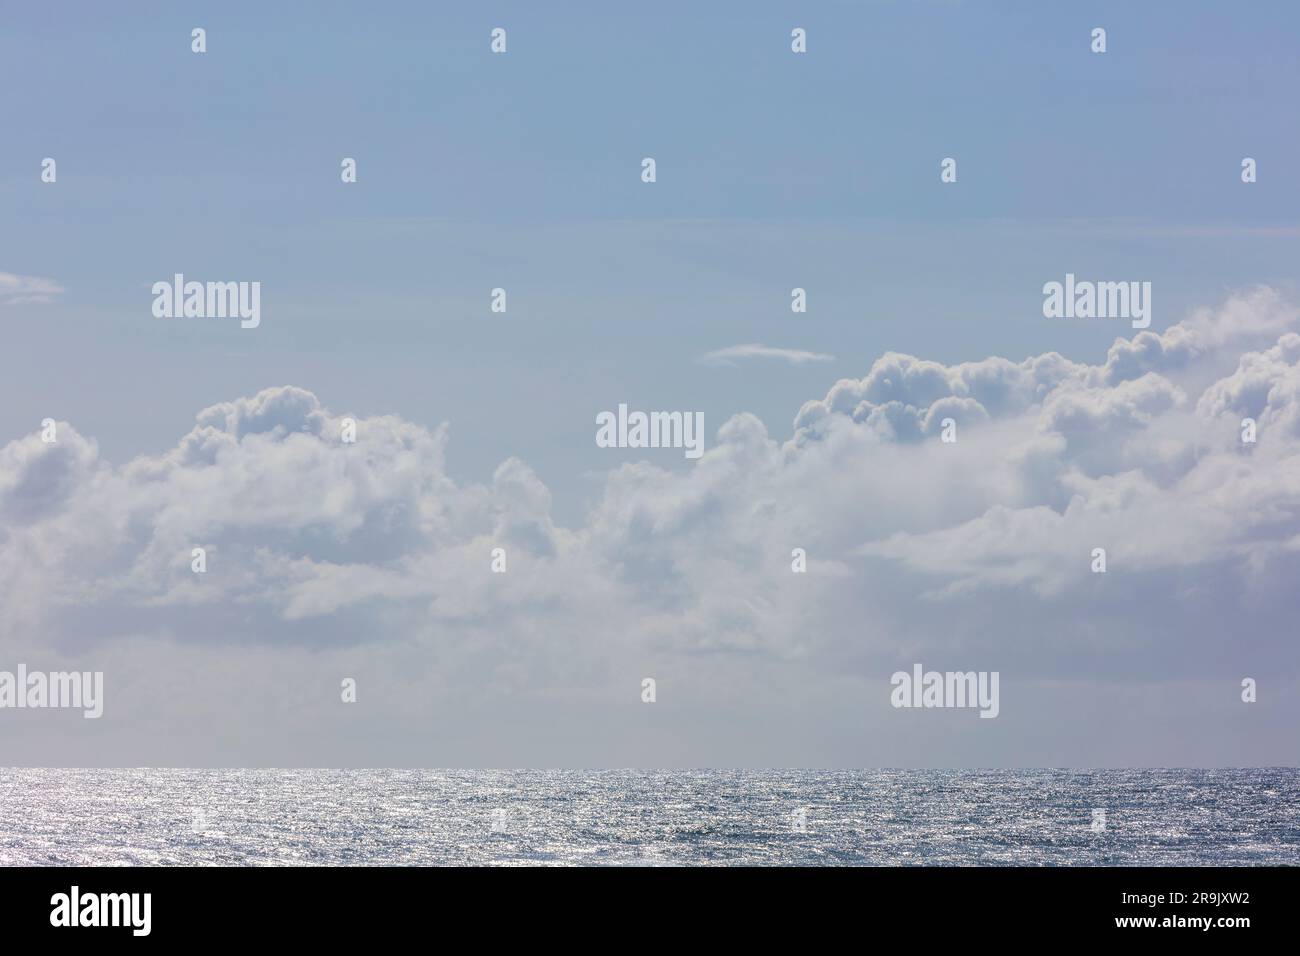 White clouds in a blue sky over the Pacific ocean. Stock Photo